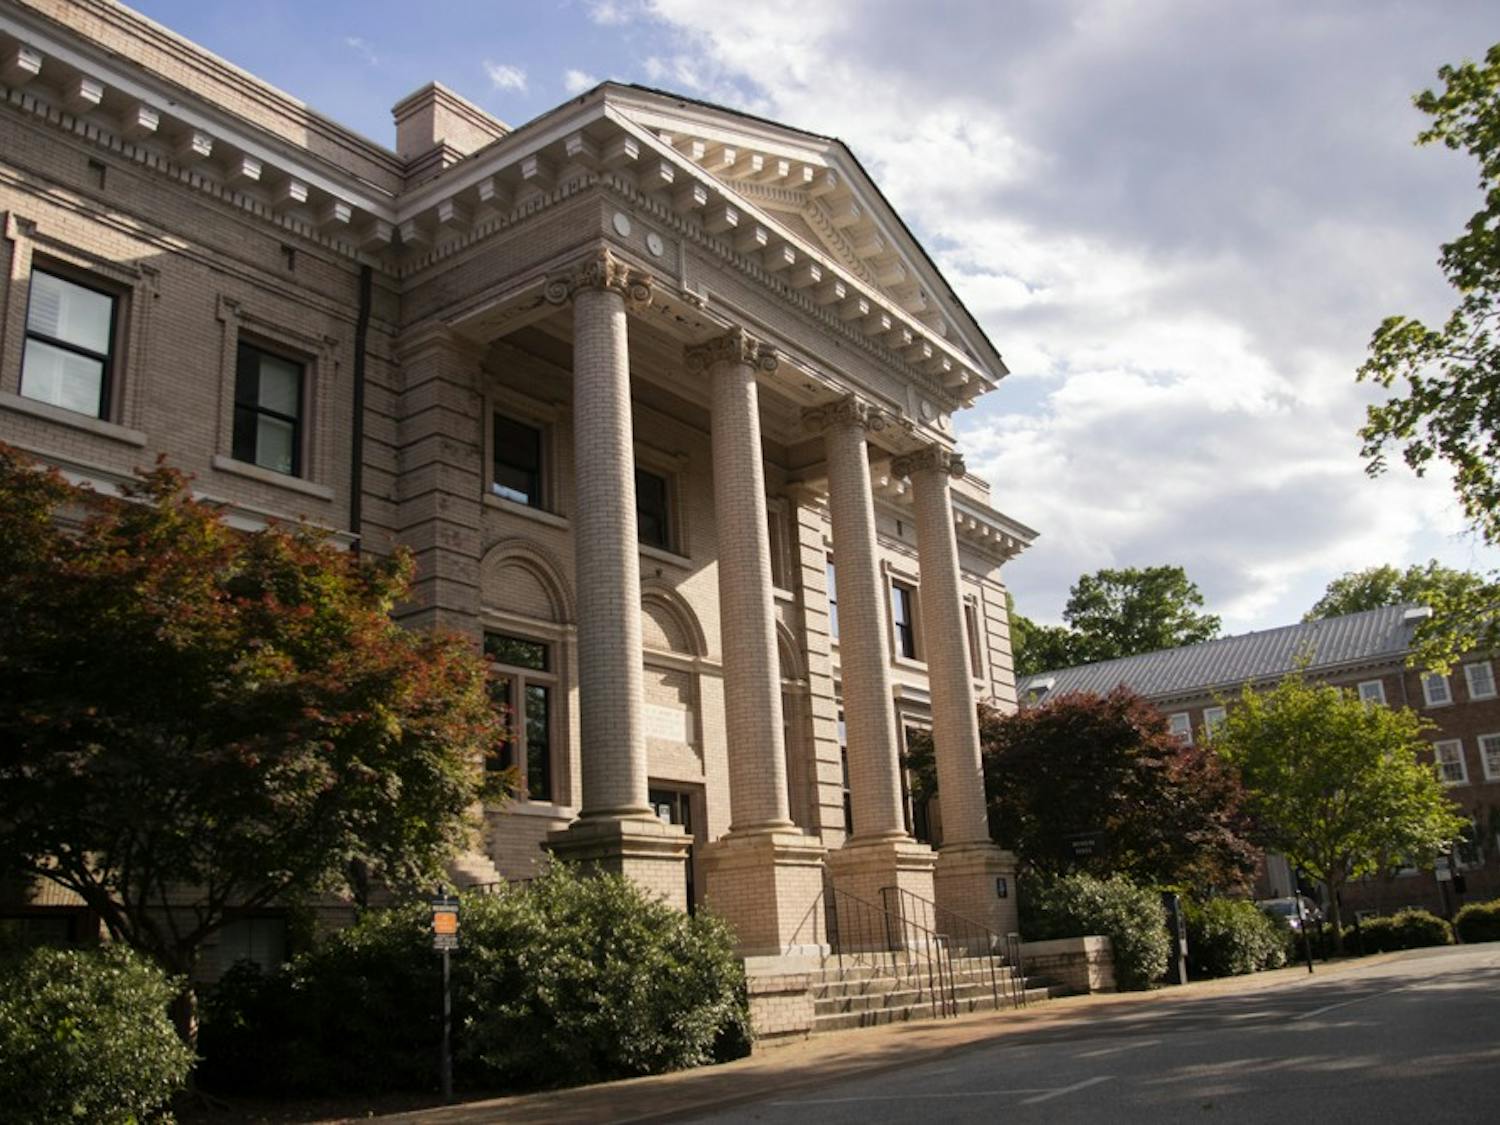 Bynum Hall pictured on Thursday, April 22, 2021. The Graduate School at UNC has recently announced they will not require GRE for graduate programs in 2022.